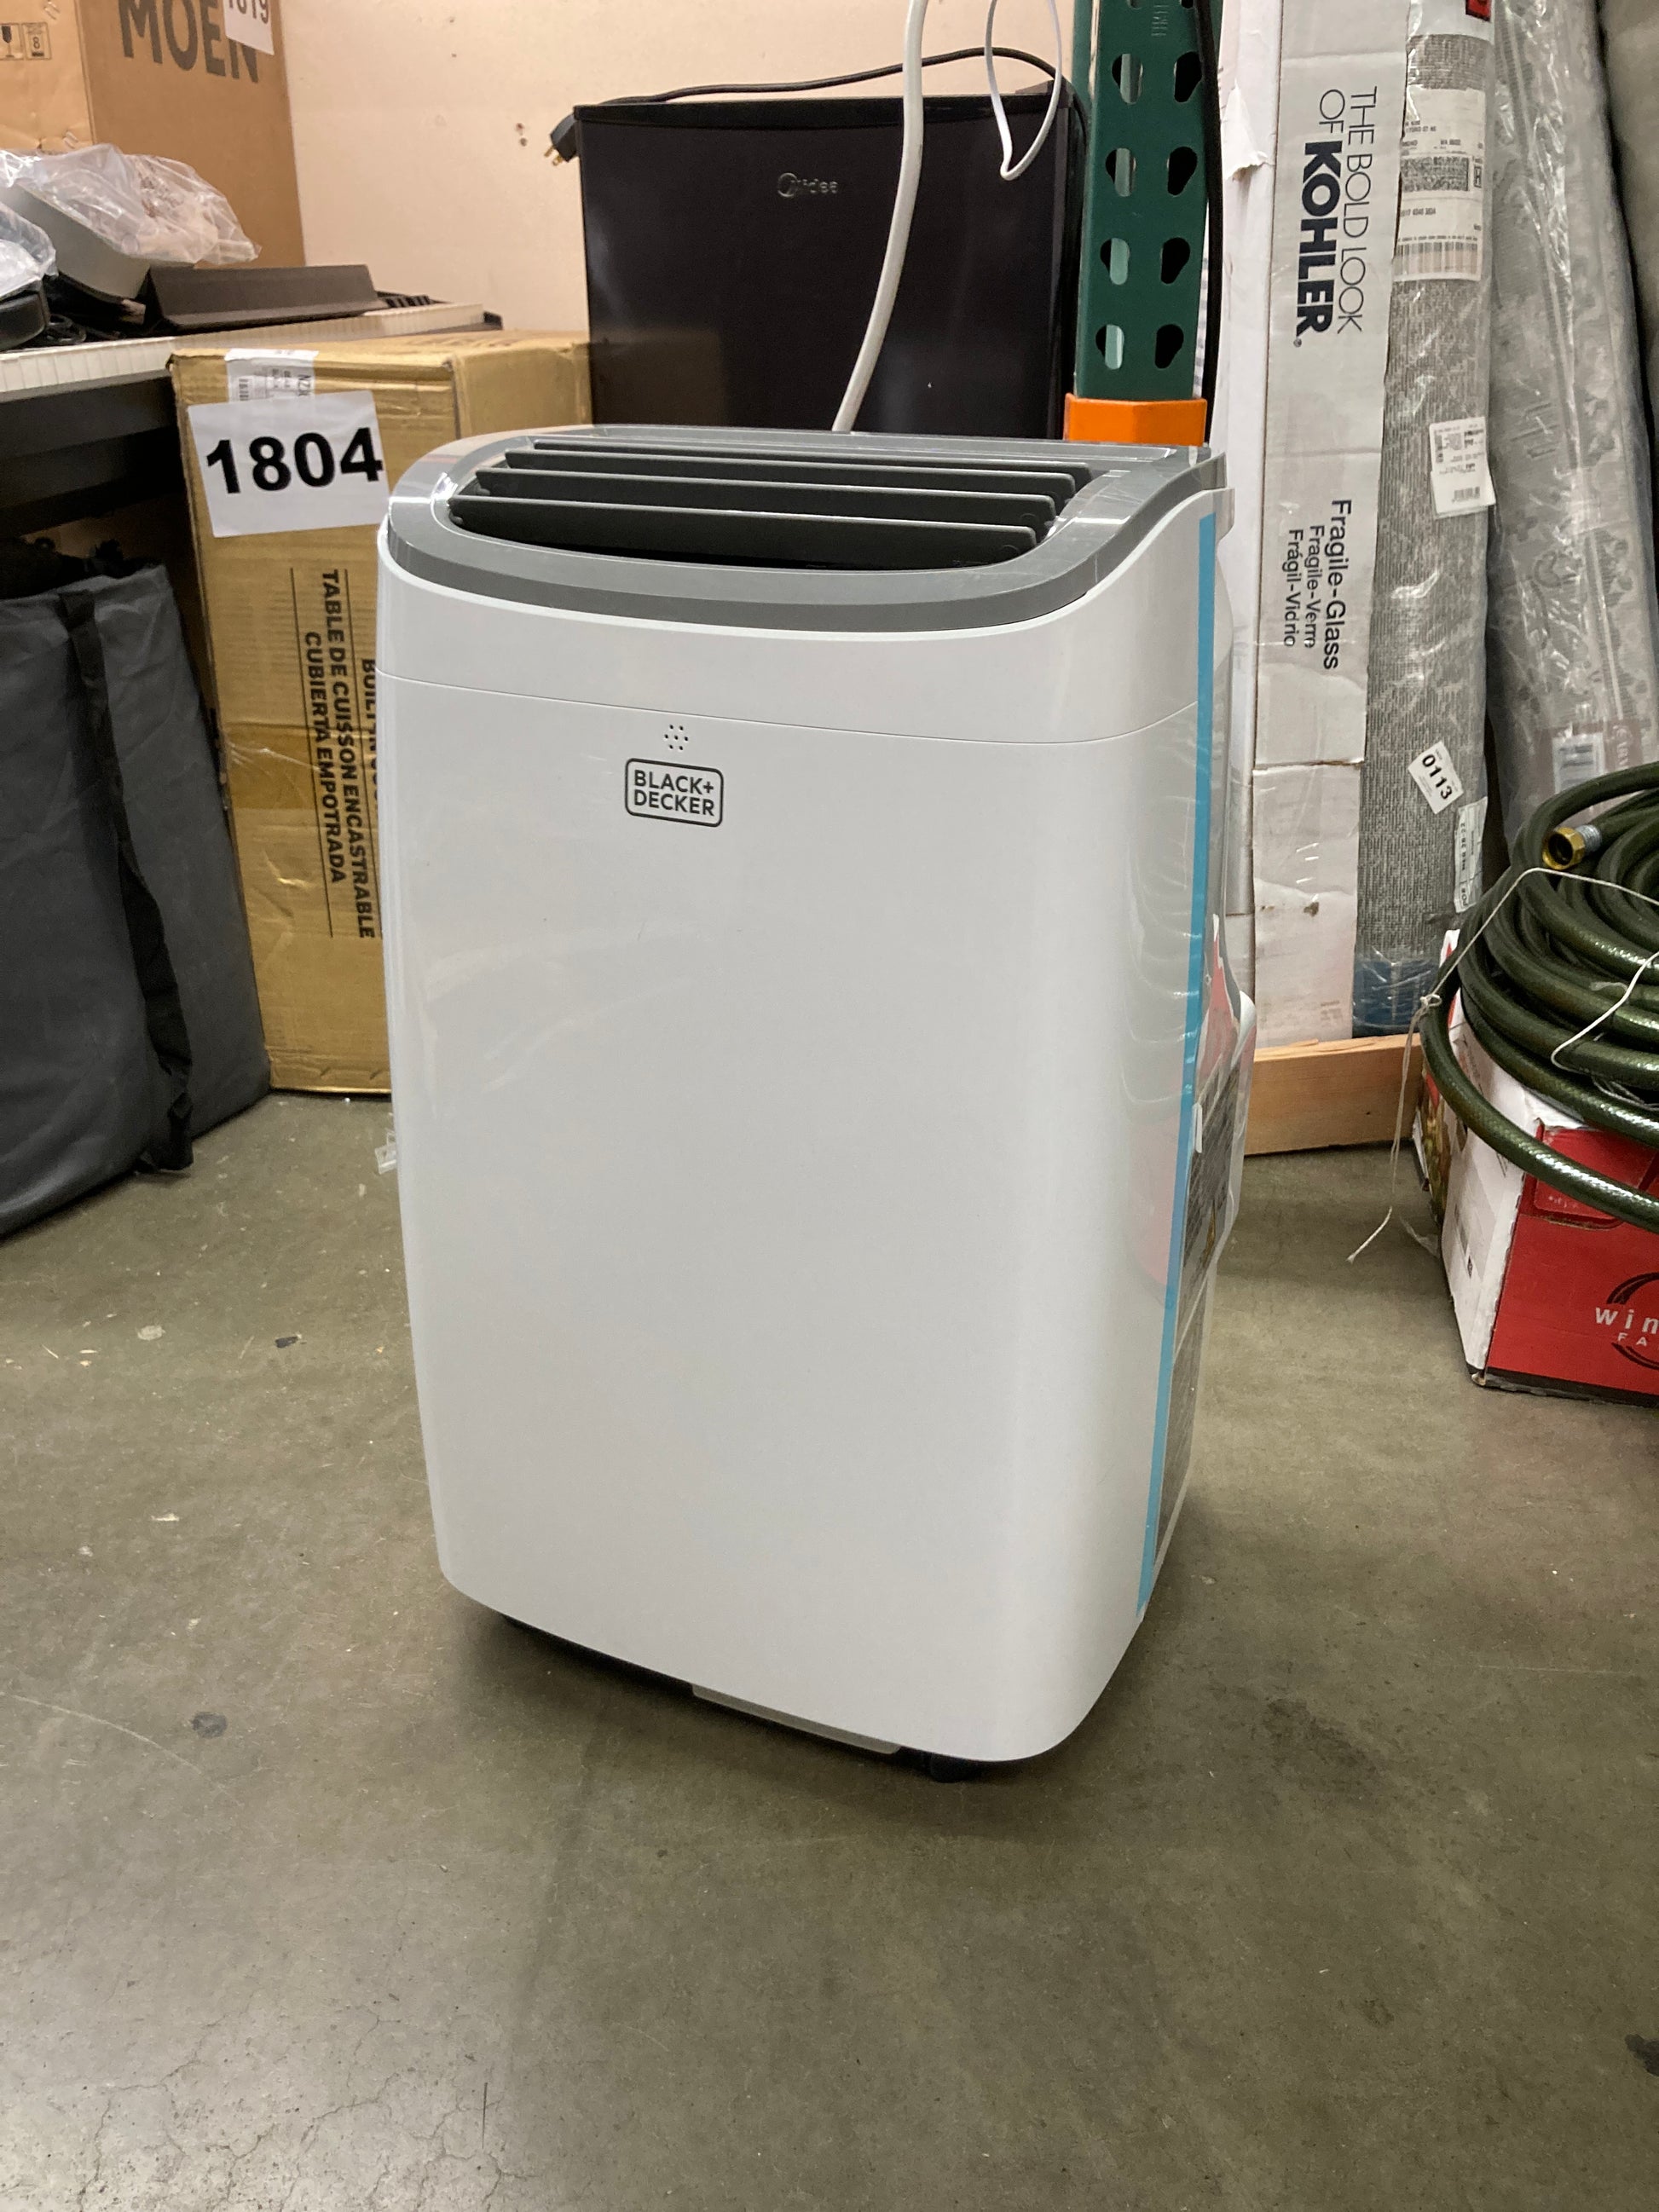 BLACK+DECKER 10,000 BTU Portable Air Conditioner up to 450 Sq. ft. with Remote Control, White - Retail $439 Default Title